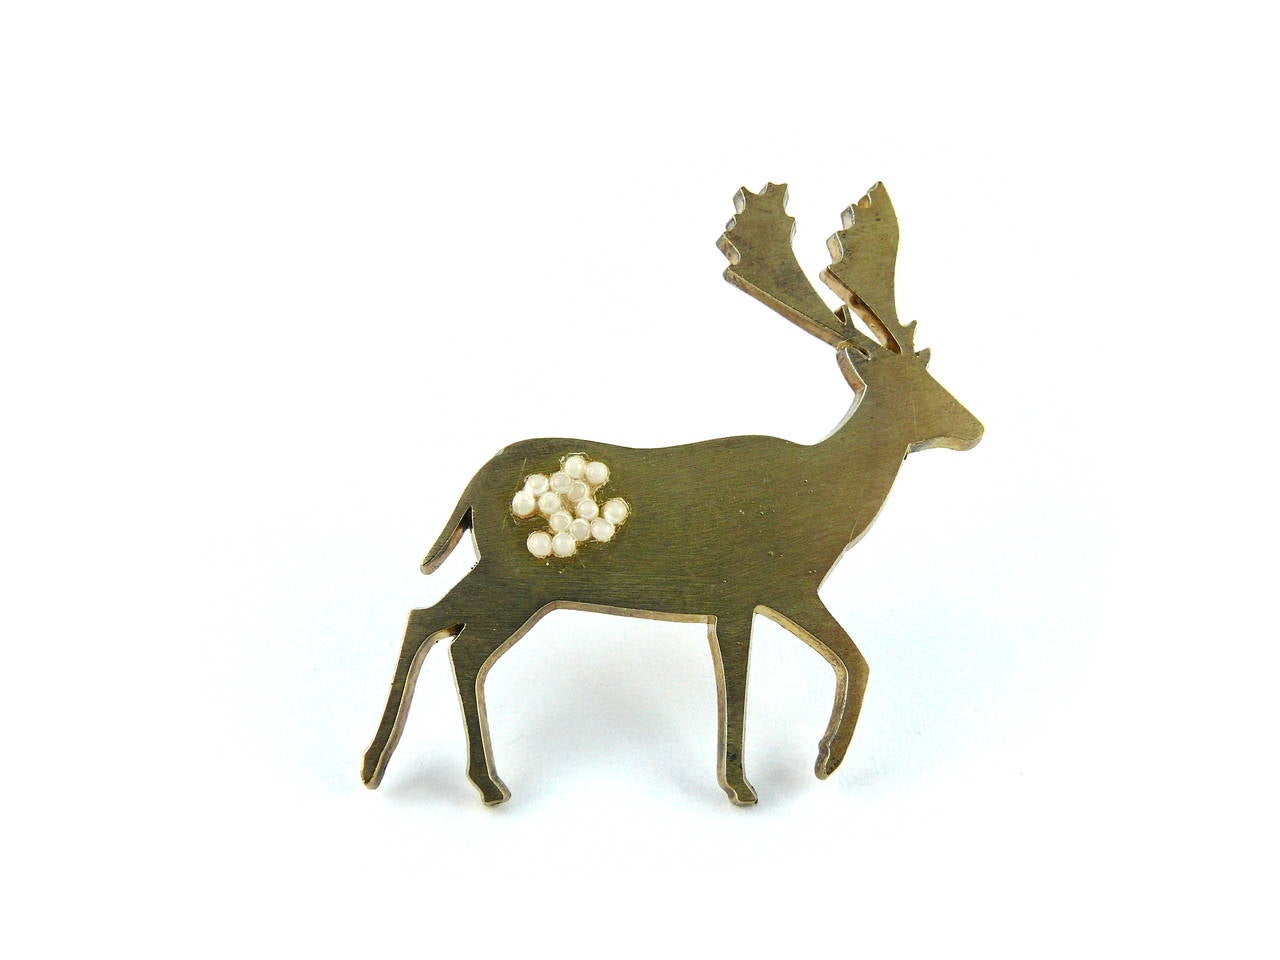 CHANEL matte gold tone deer brooch featuring a faux pearl signature logo.

Fall/Winter 2011.

Marked CHANEL 01 A Made in France.

JEWELRY CONDITION CHART
- New or never worn : item is in pristine condition with no noticeable imperfections
-